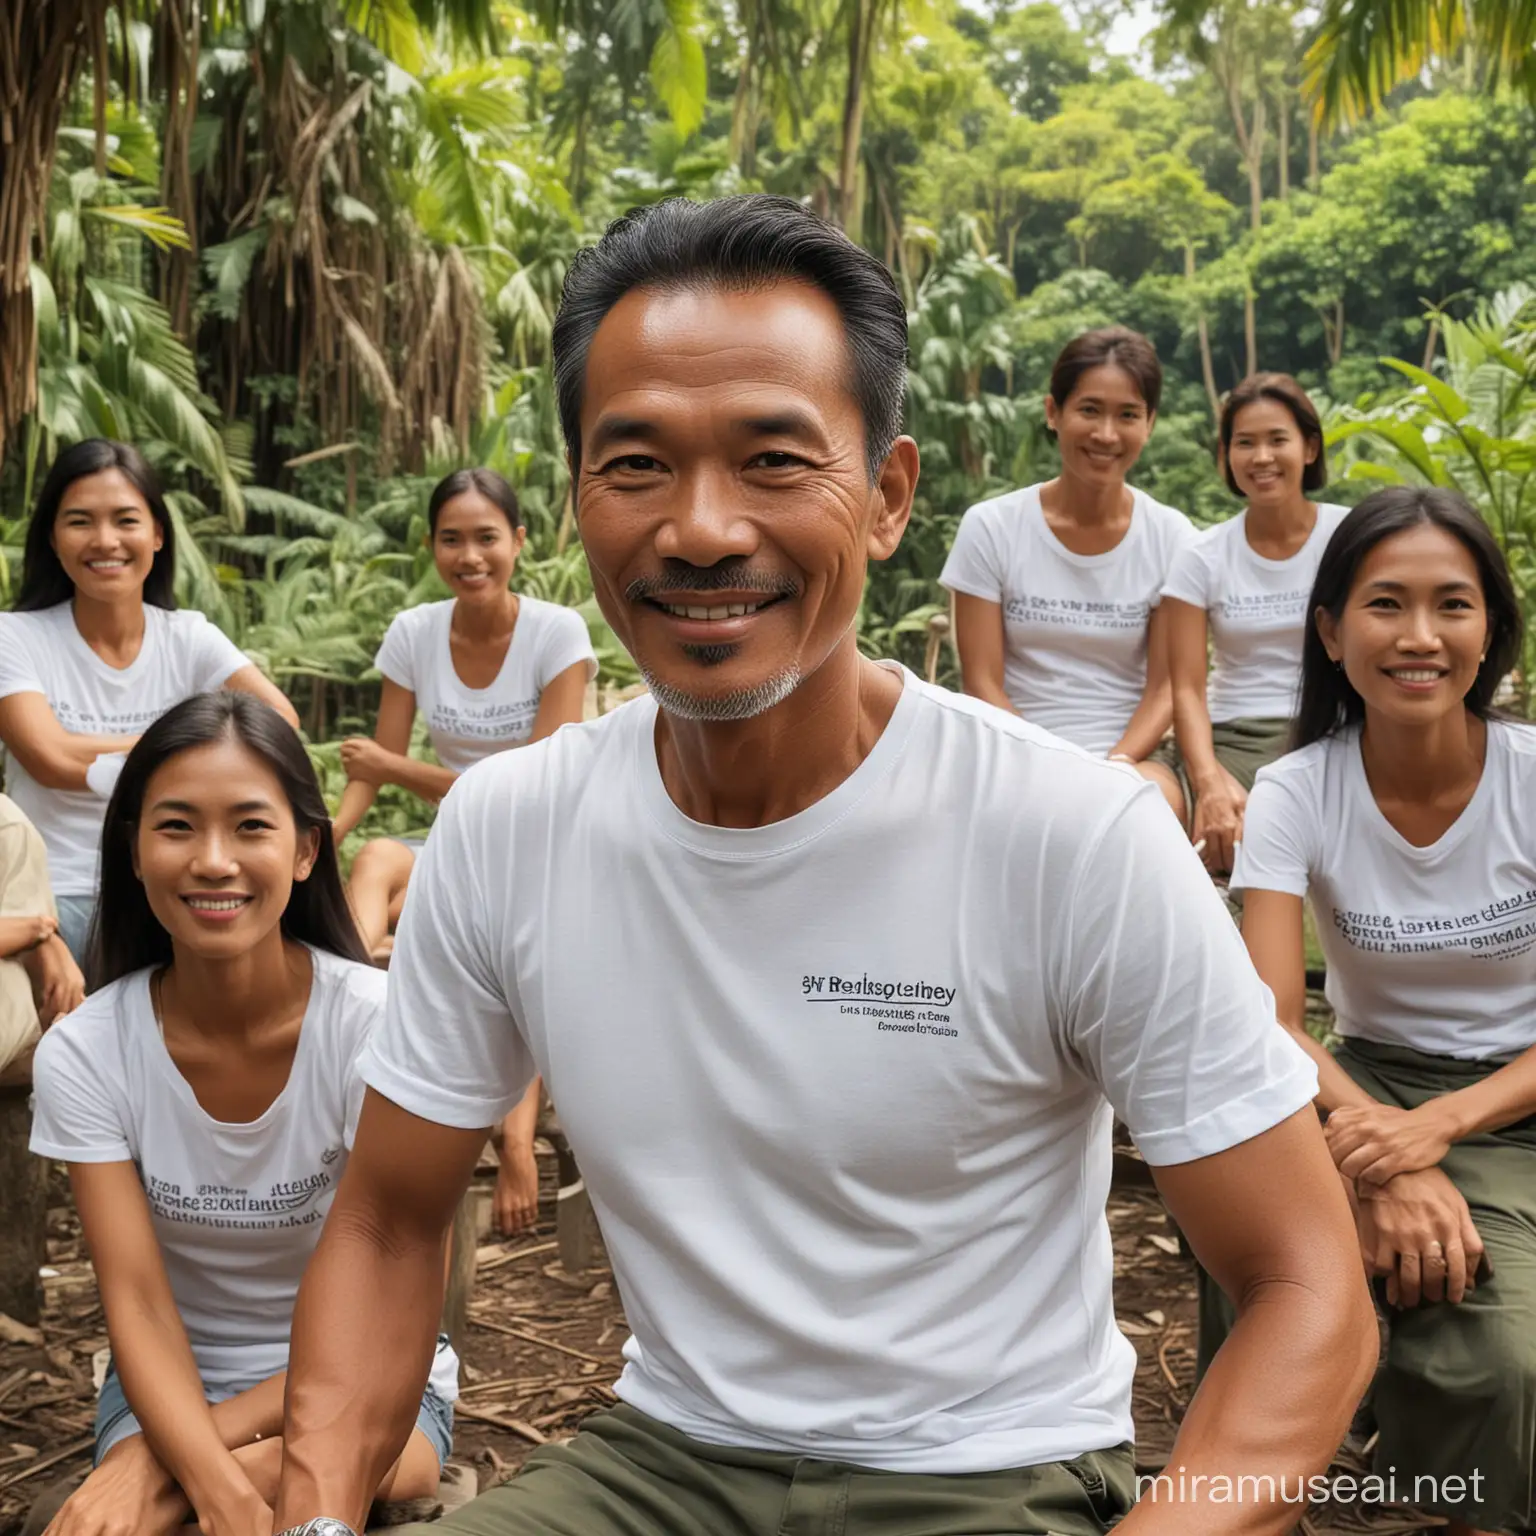 Authentic Indonesian Man Seeking Sustainable Travel Experiences